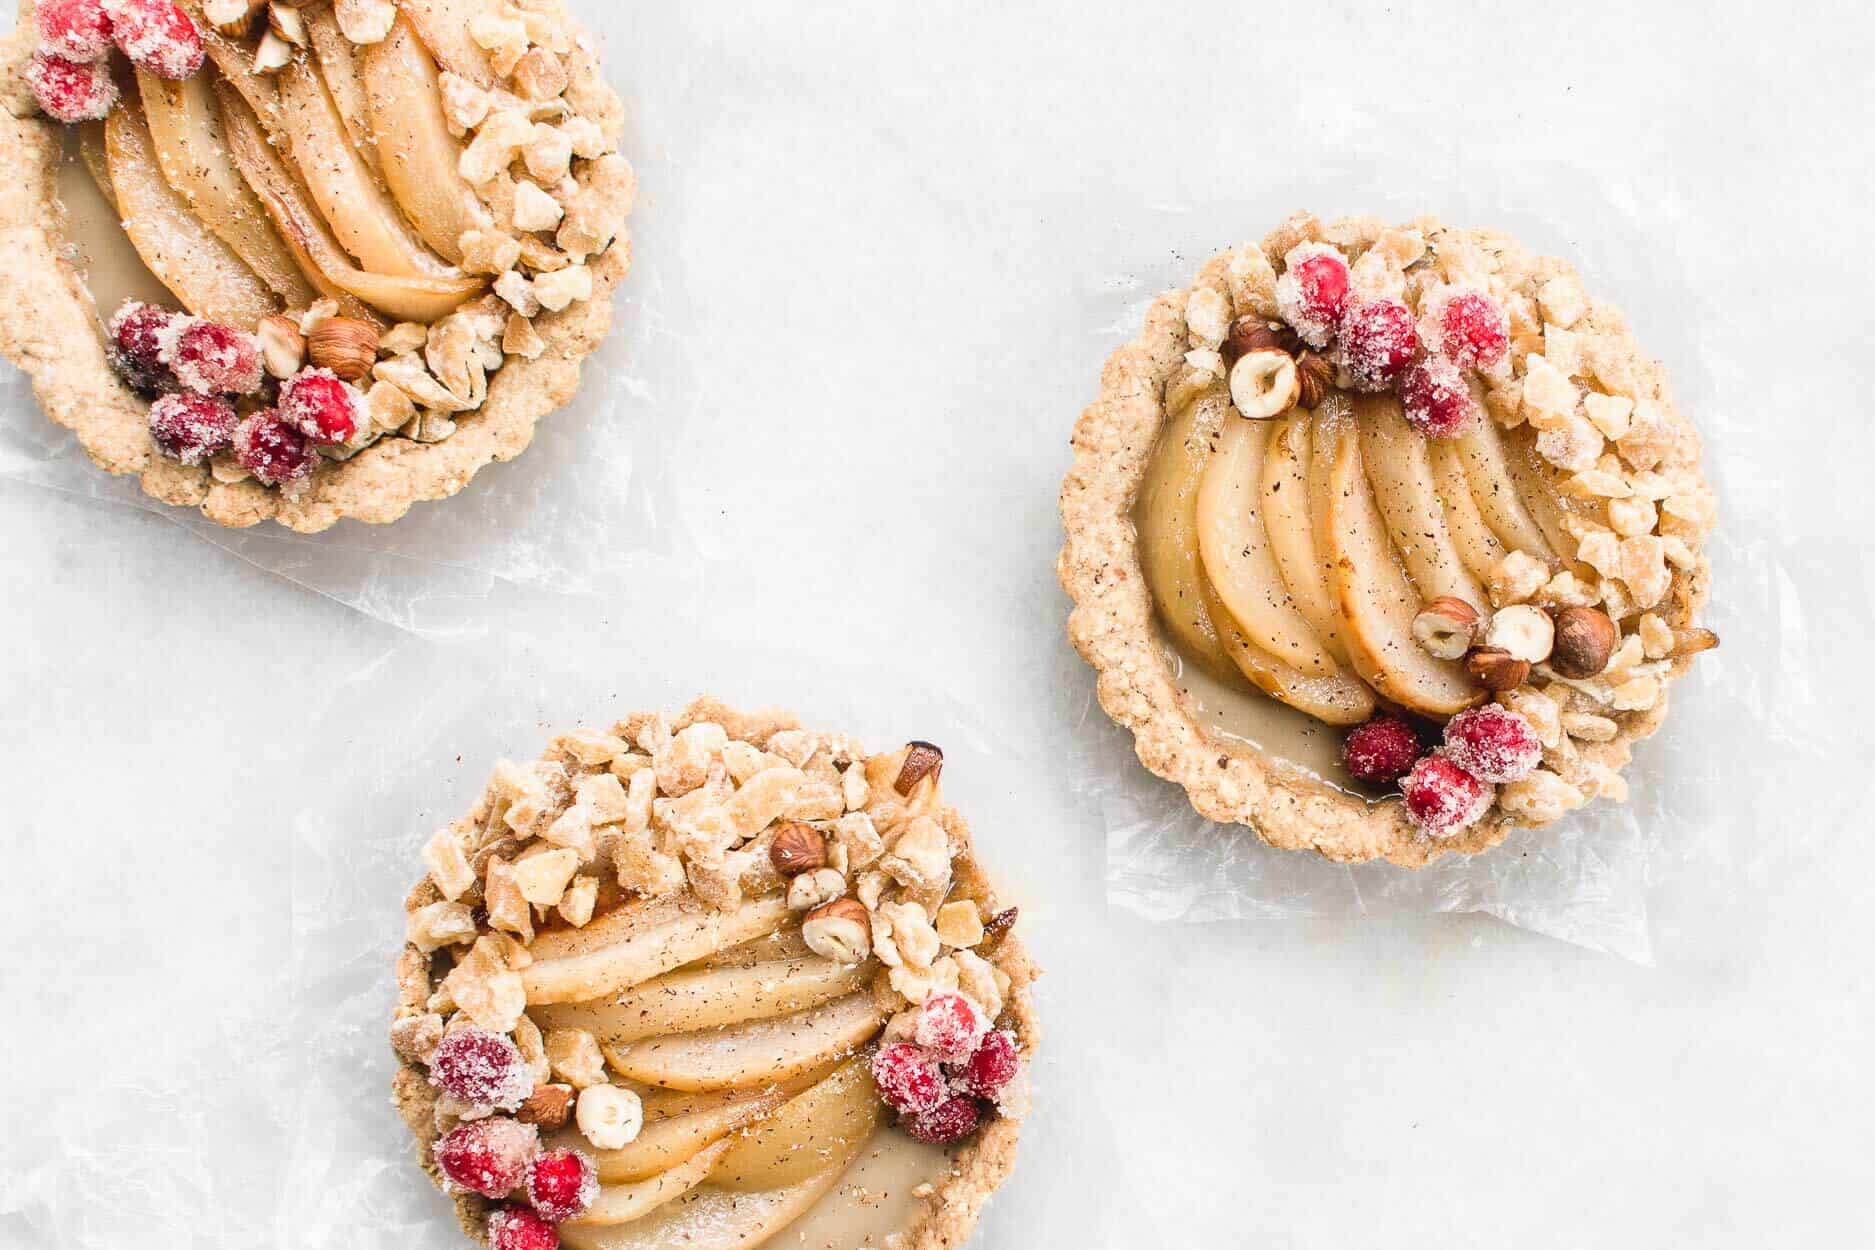 Coconut and Roasted Pear Tartlets from Nourished Kitchen